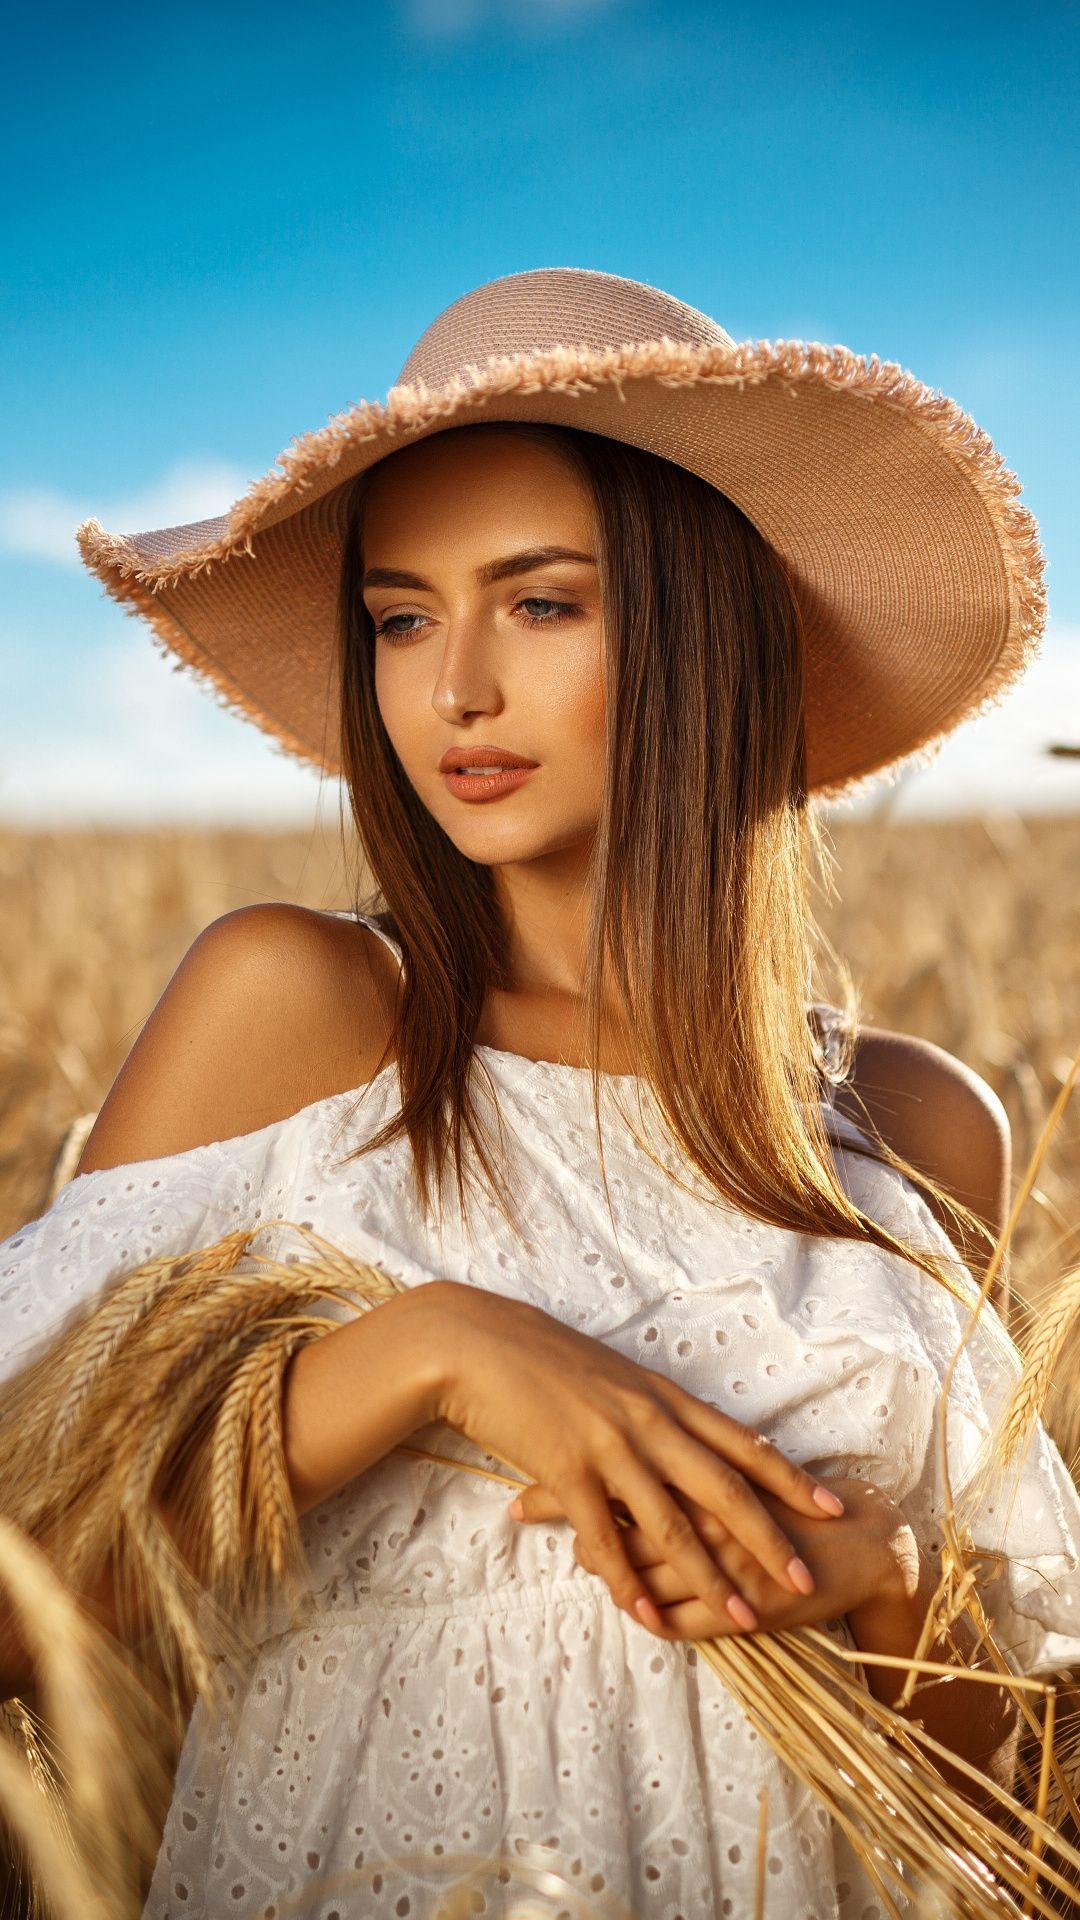 Beautiful, woman, straw hat, outdoor, wheat farm, 1080x1920 wallpaper. Photography poses women, Photography women, Girl photography poses